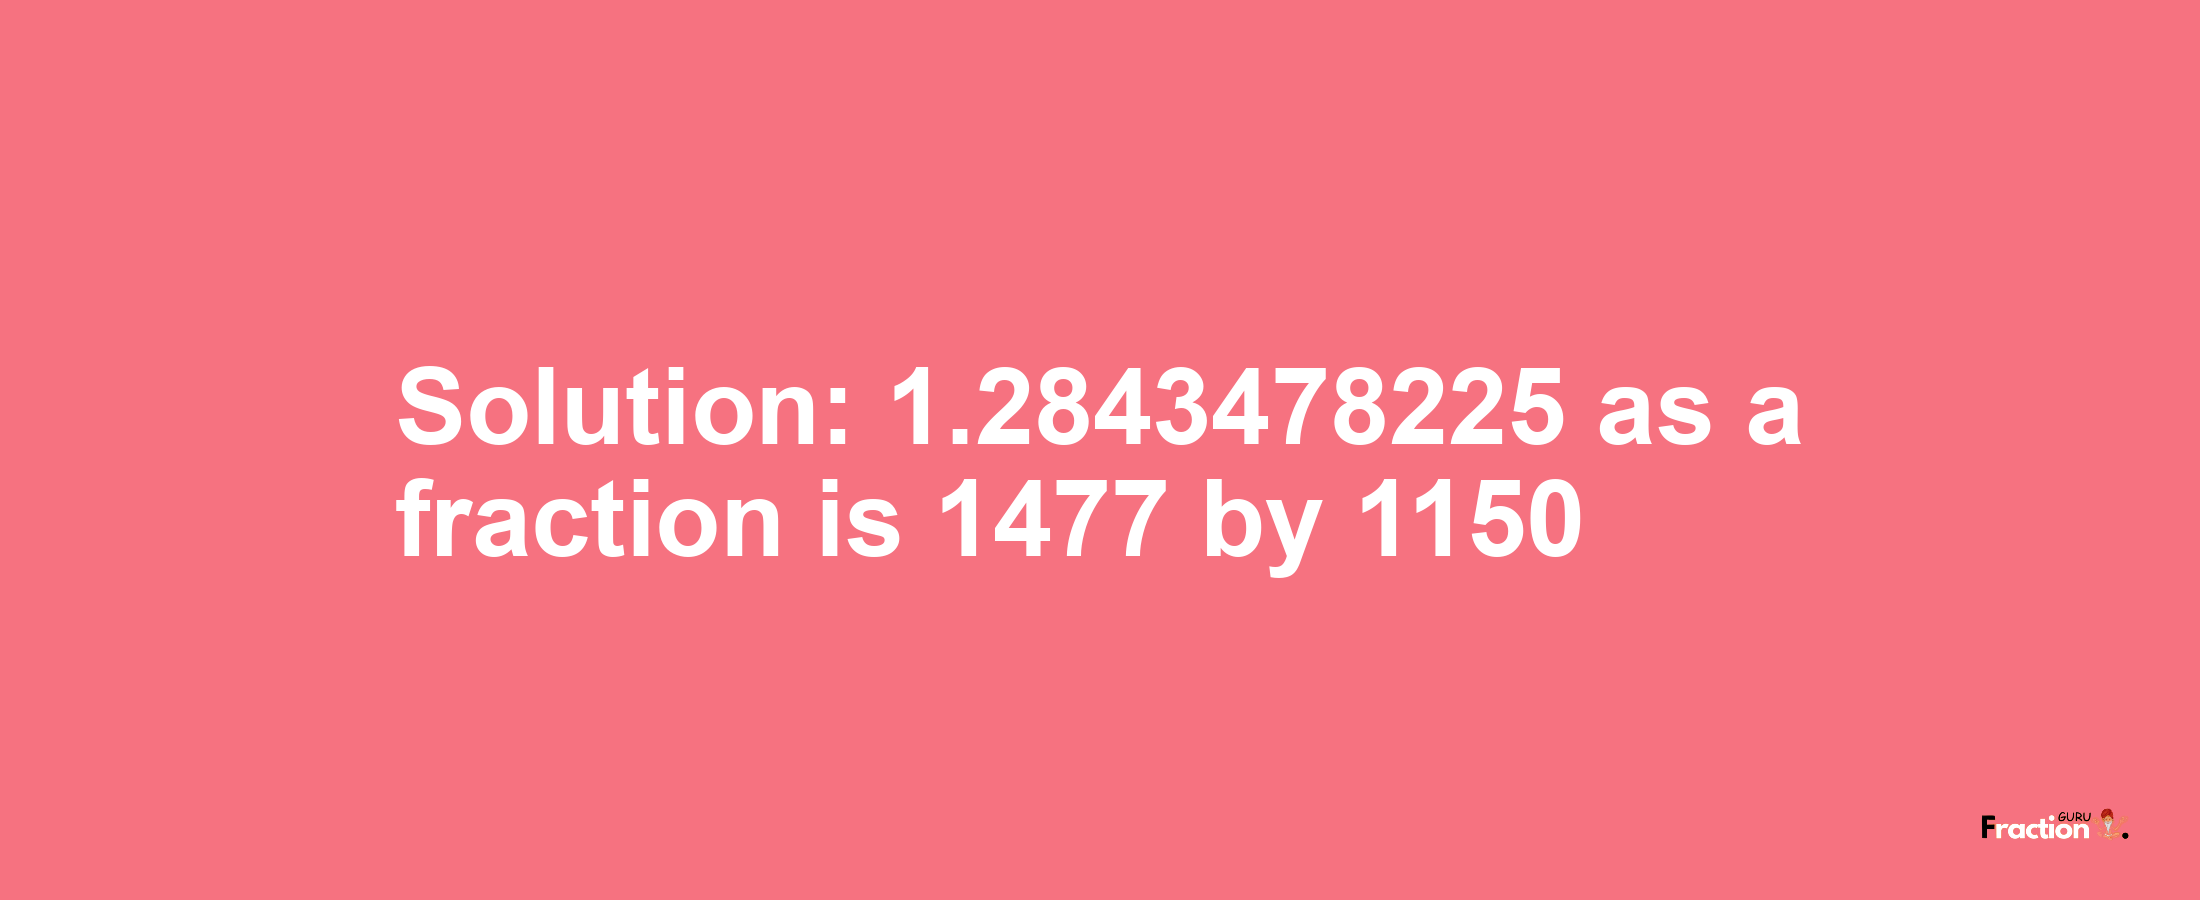 Solution:1.2843478225 as a fraction is 1477/1150